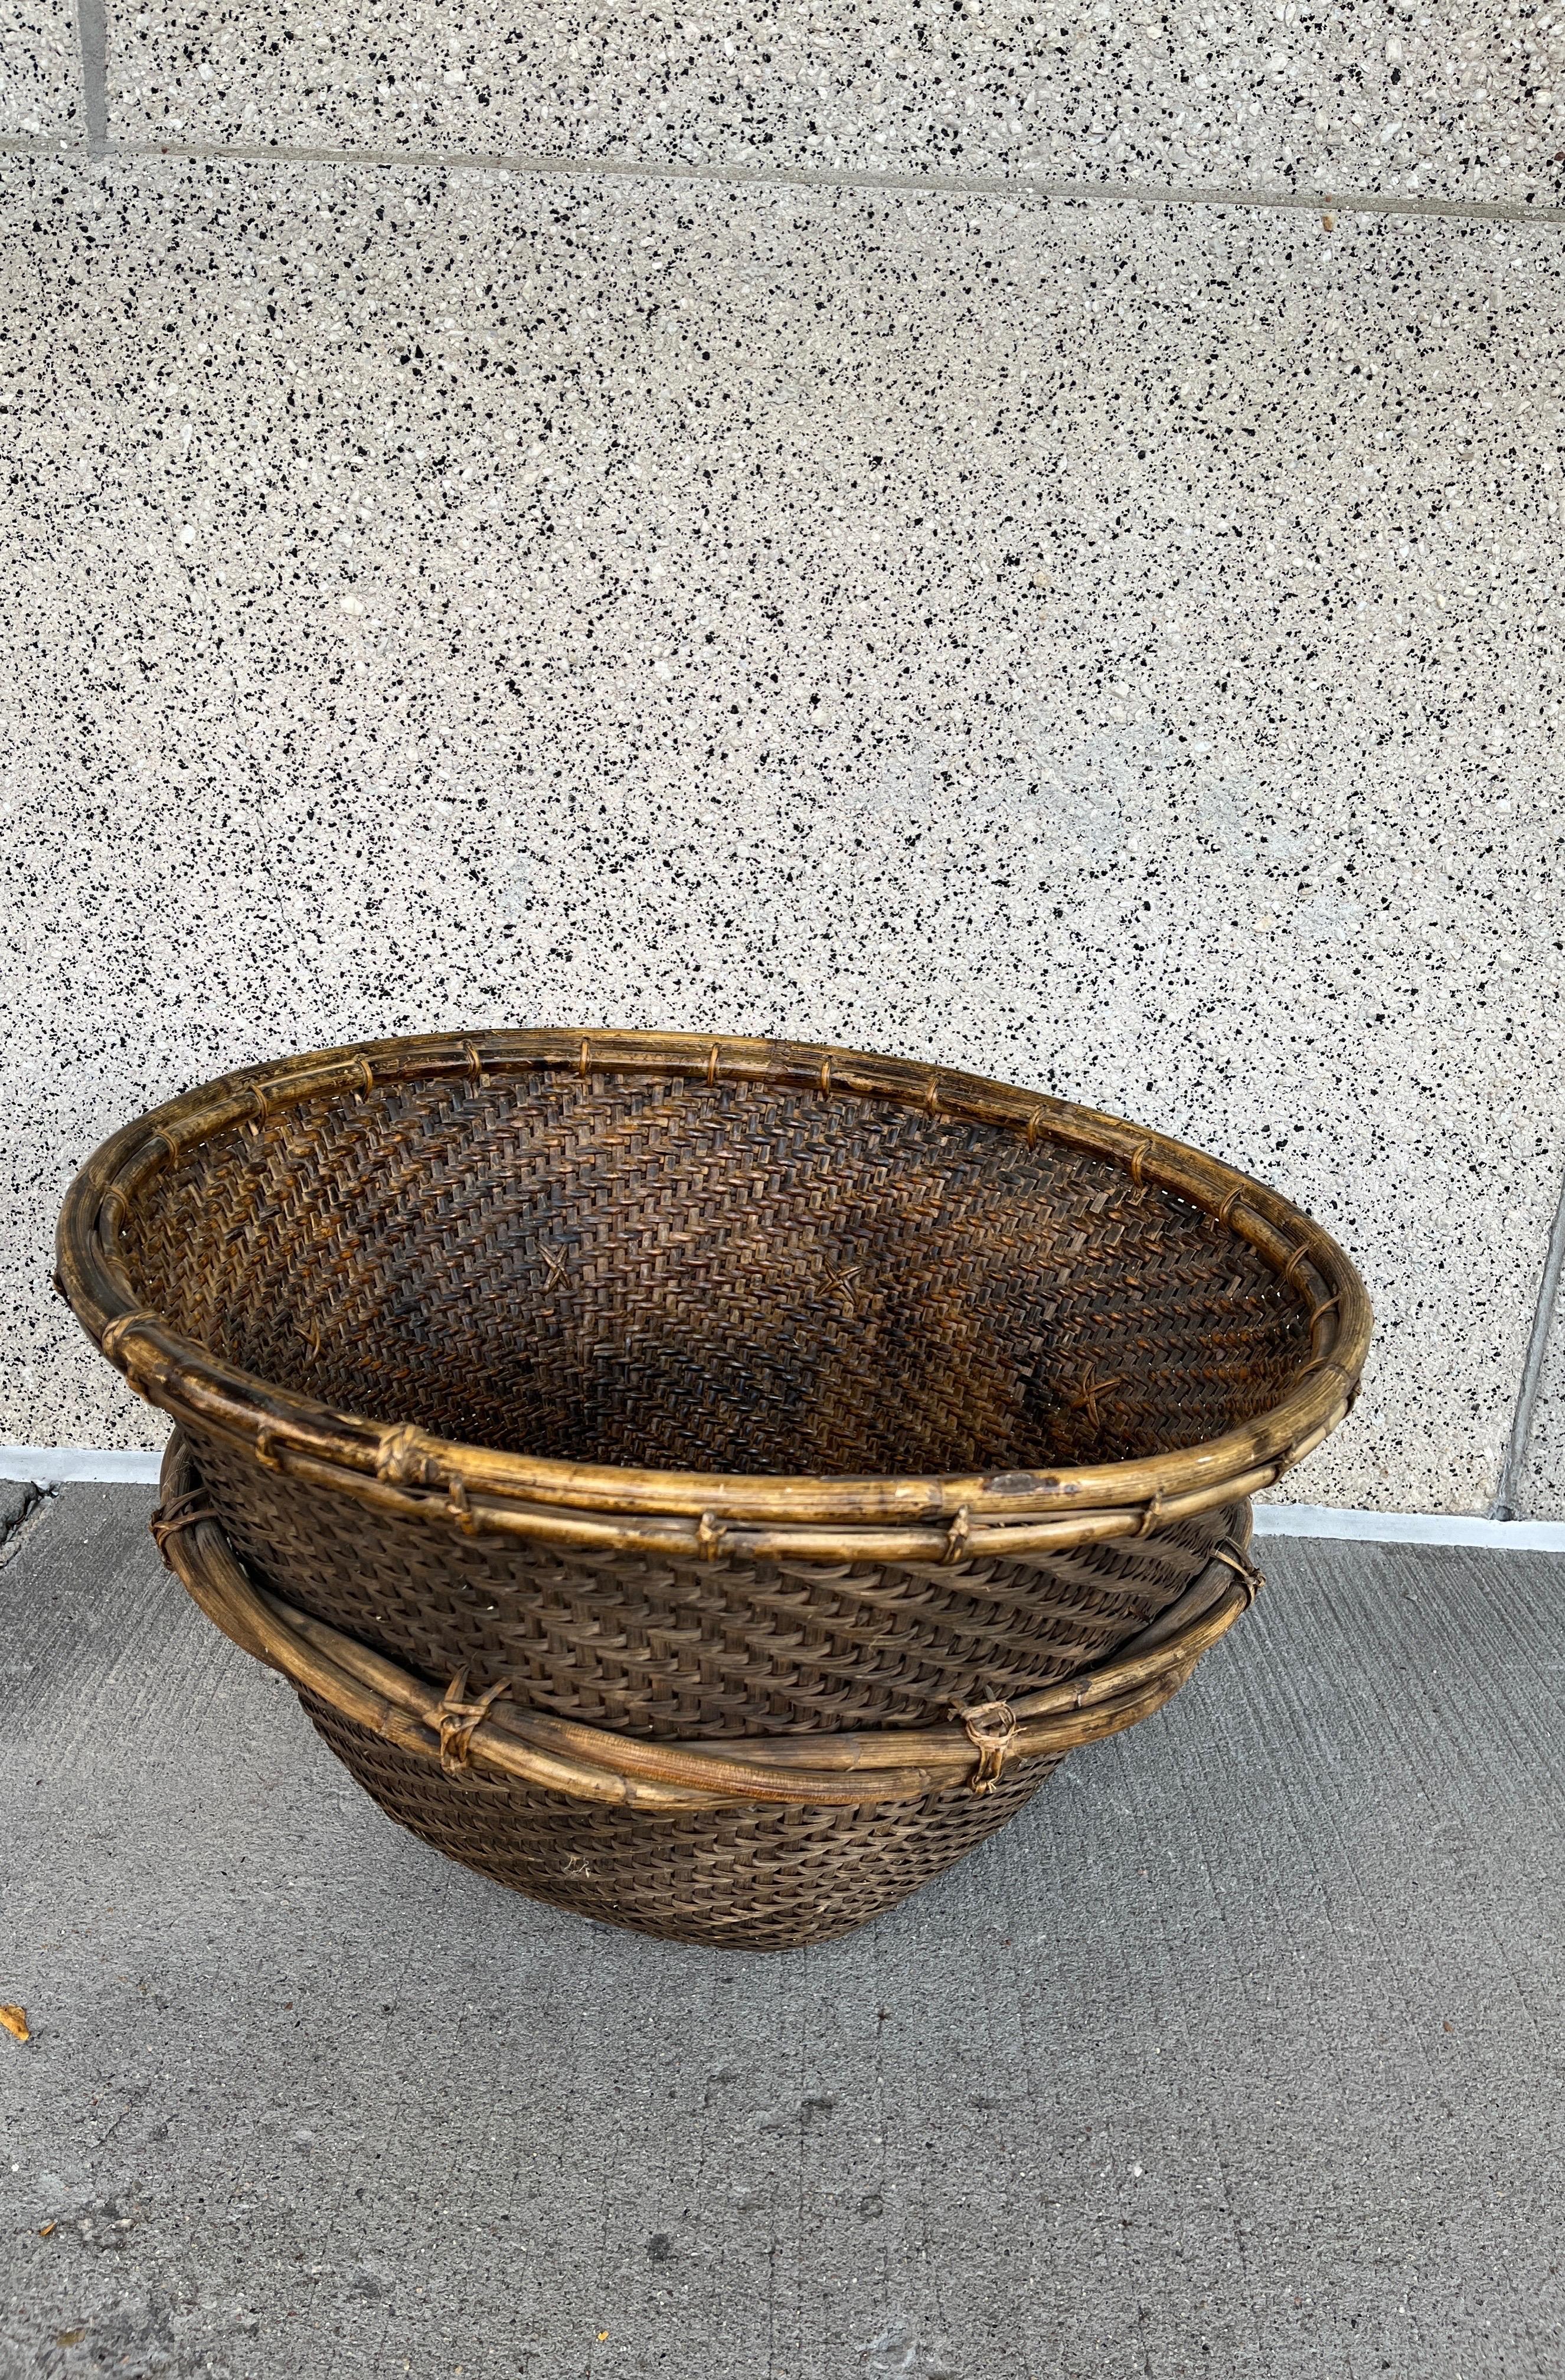 Large Contemporary Woven Basket, Philippines 2